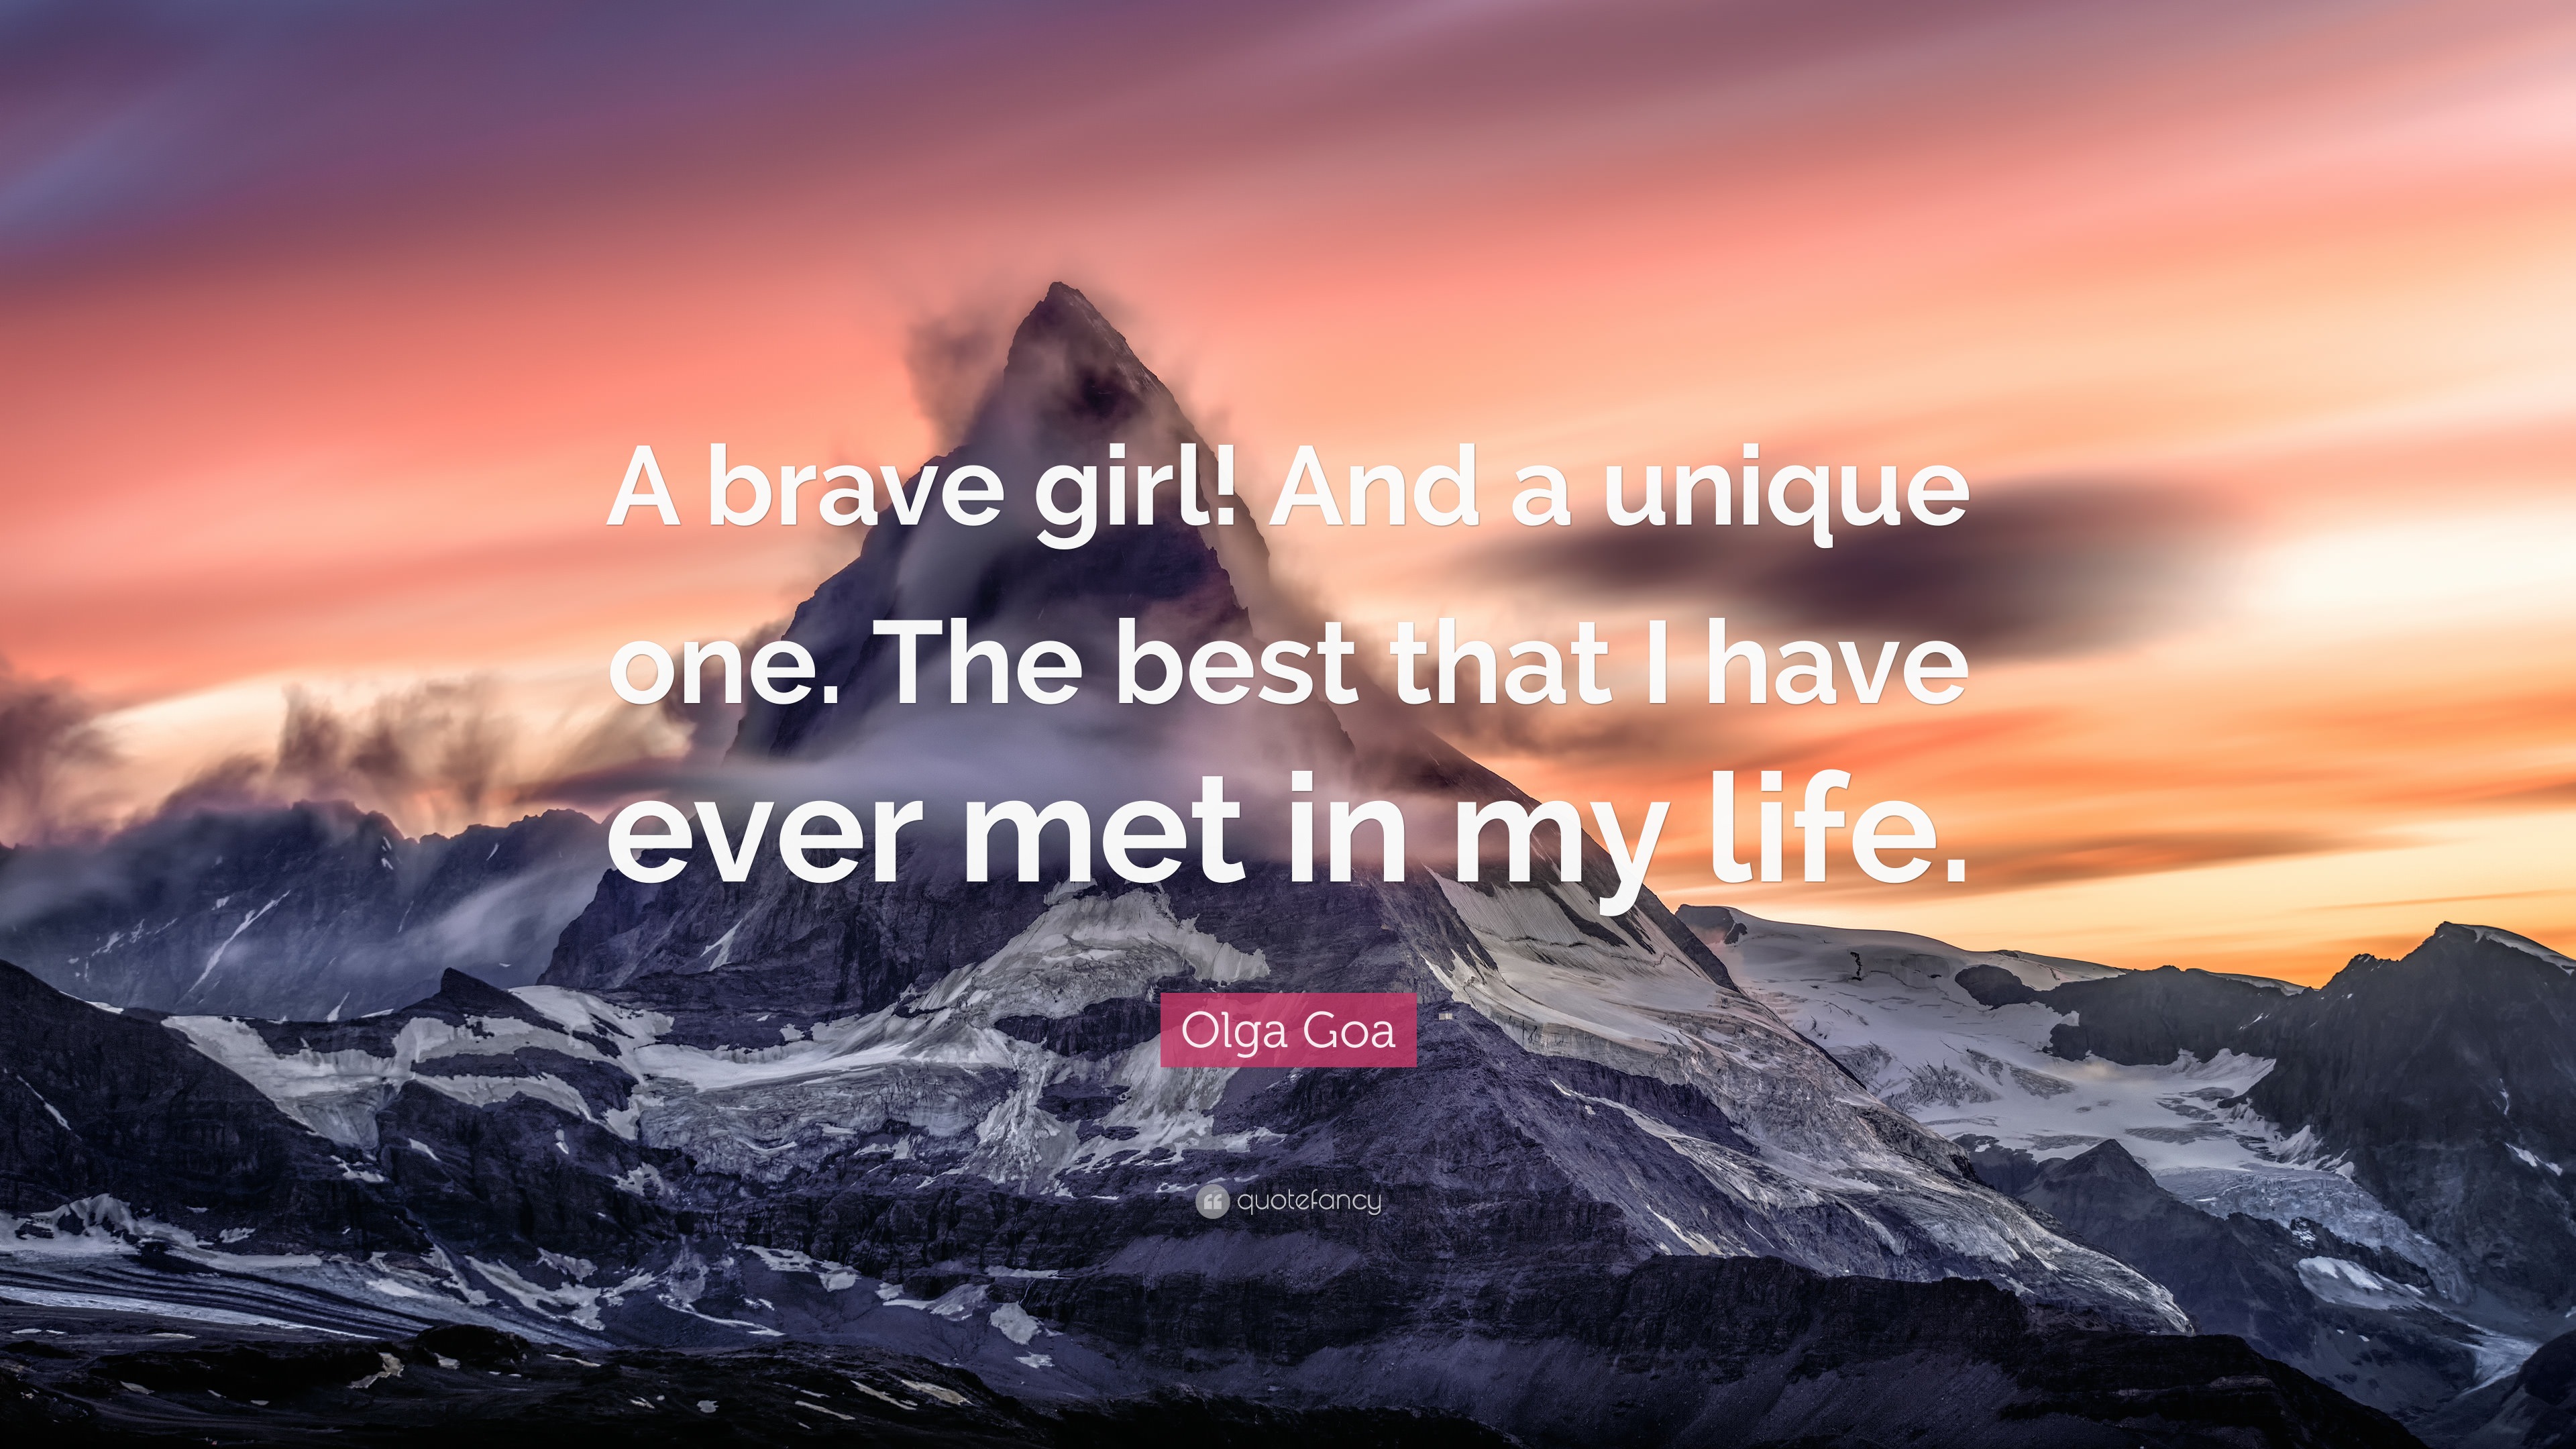 Olga Goa Quote: “A brave girl! And a unique one. The best that I have ever